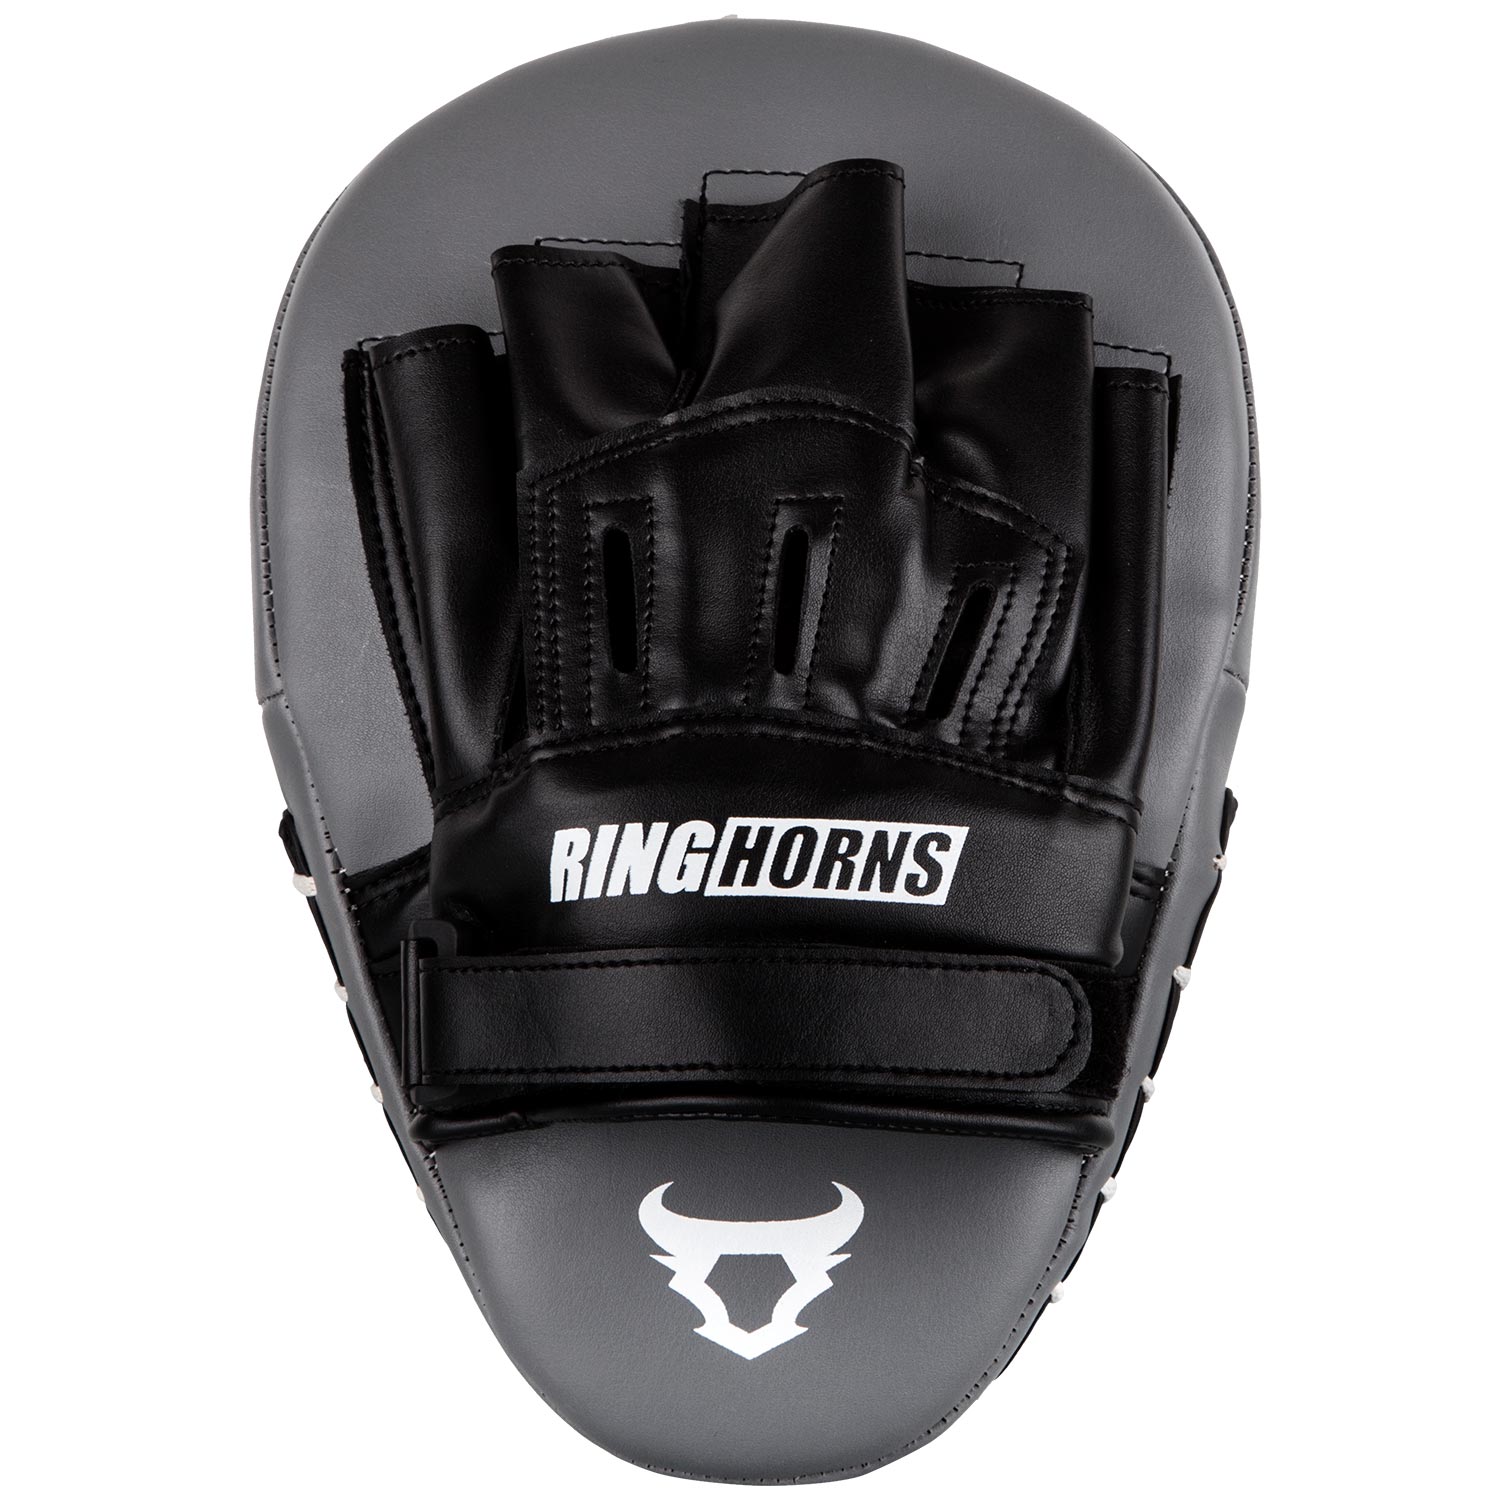 Ringhorns Charger Punch Mitts - image 5 of 10